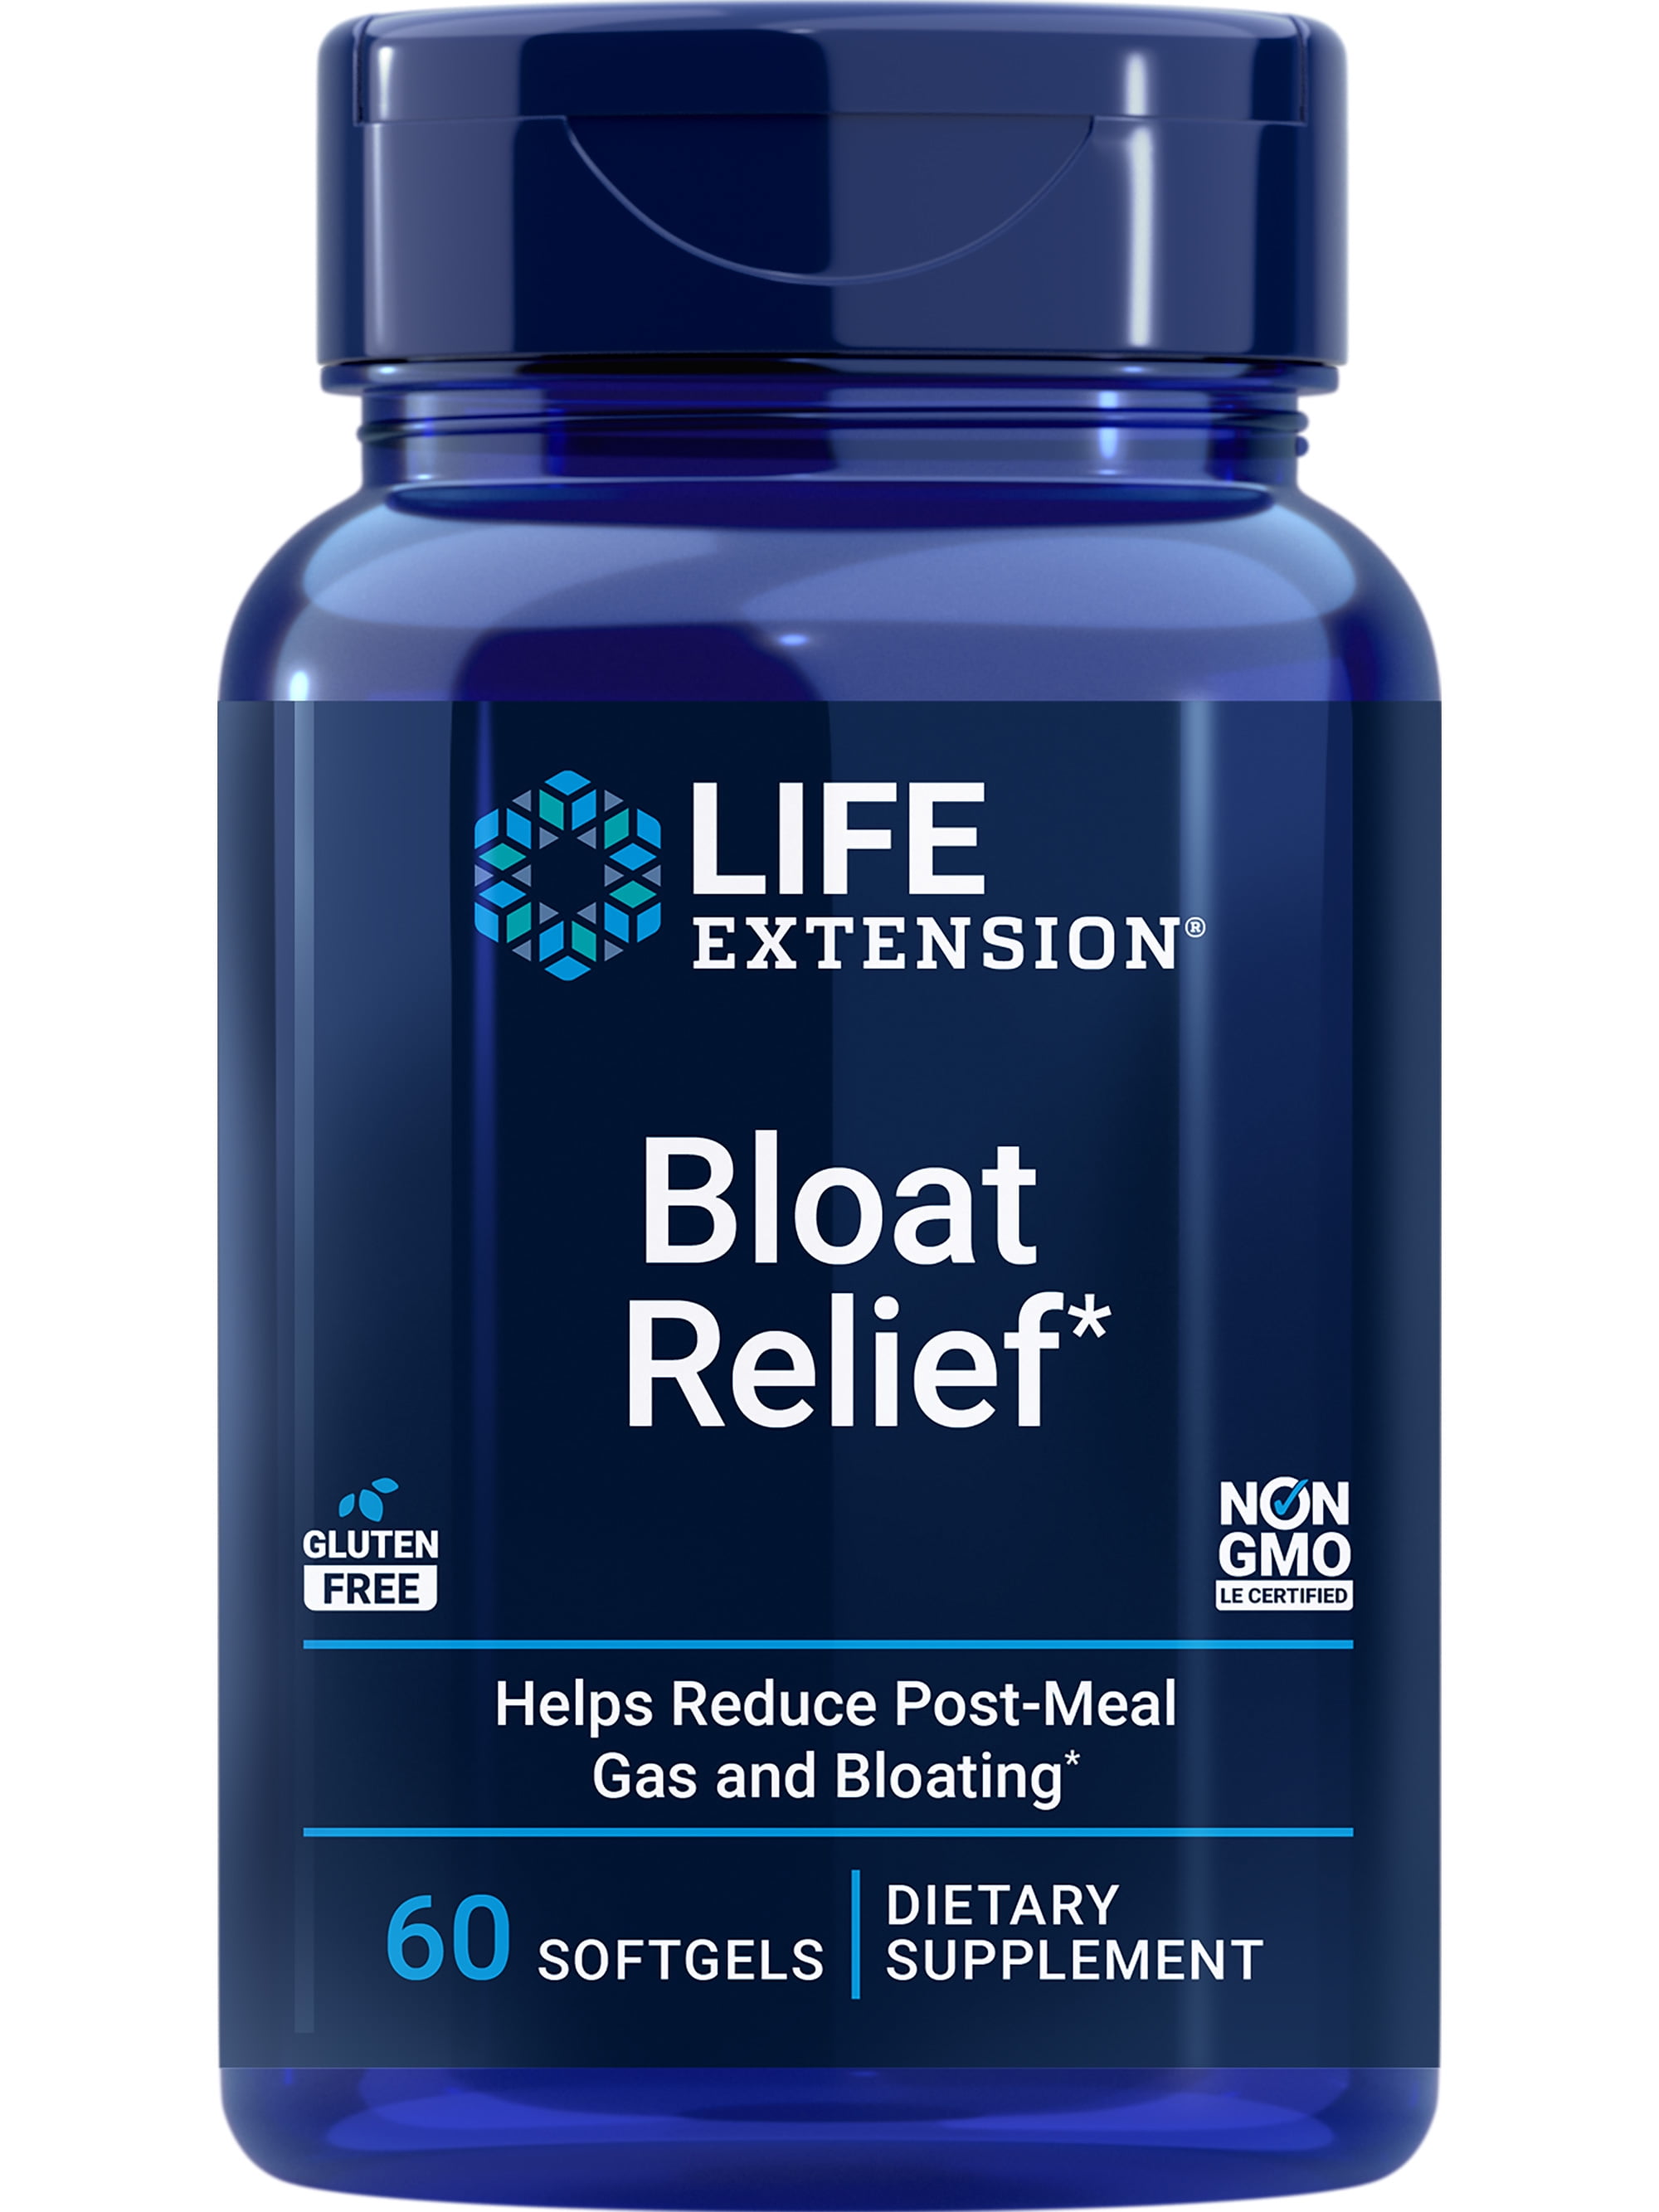 Life Extension Bloat Relief - Helps Relieve Occasional Bloating & Other  Discomforts After Meals - Gluten-Free, Non-GMO - 60 Softgels 